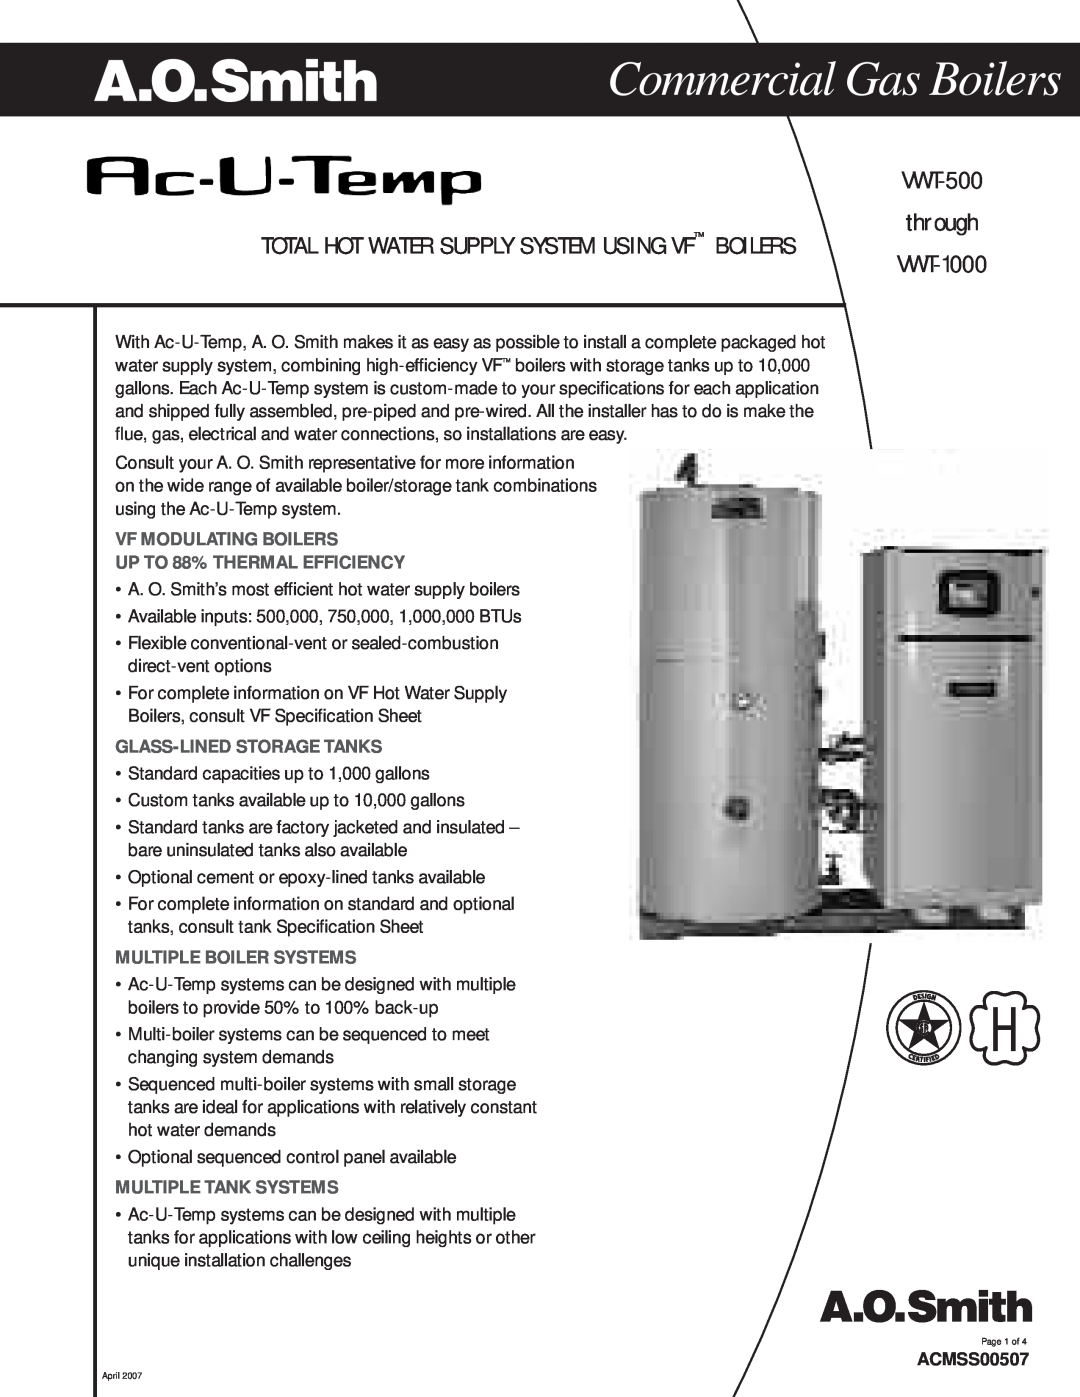 A.O. Smith ACMSS00507 specifications Commercial Gas Boilers, VF MODULATING BOILERS UP TO 88% THERMAL EFFICIENCY, through 